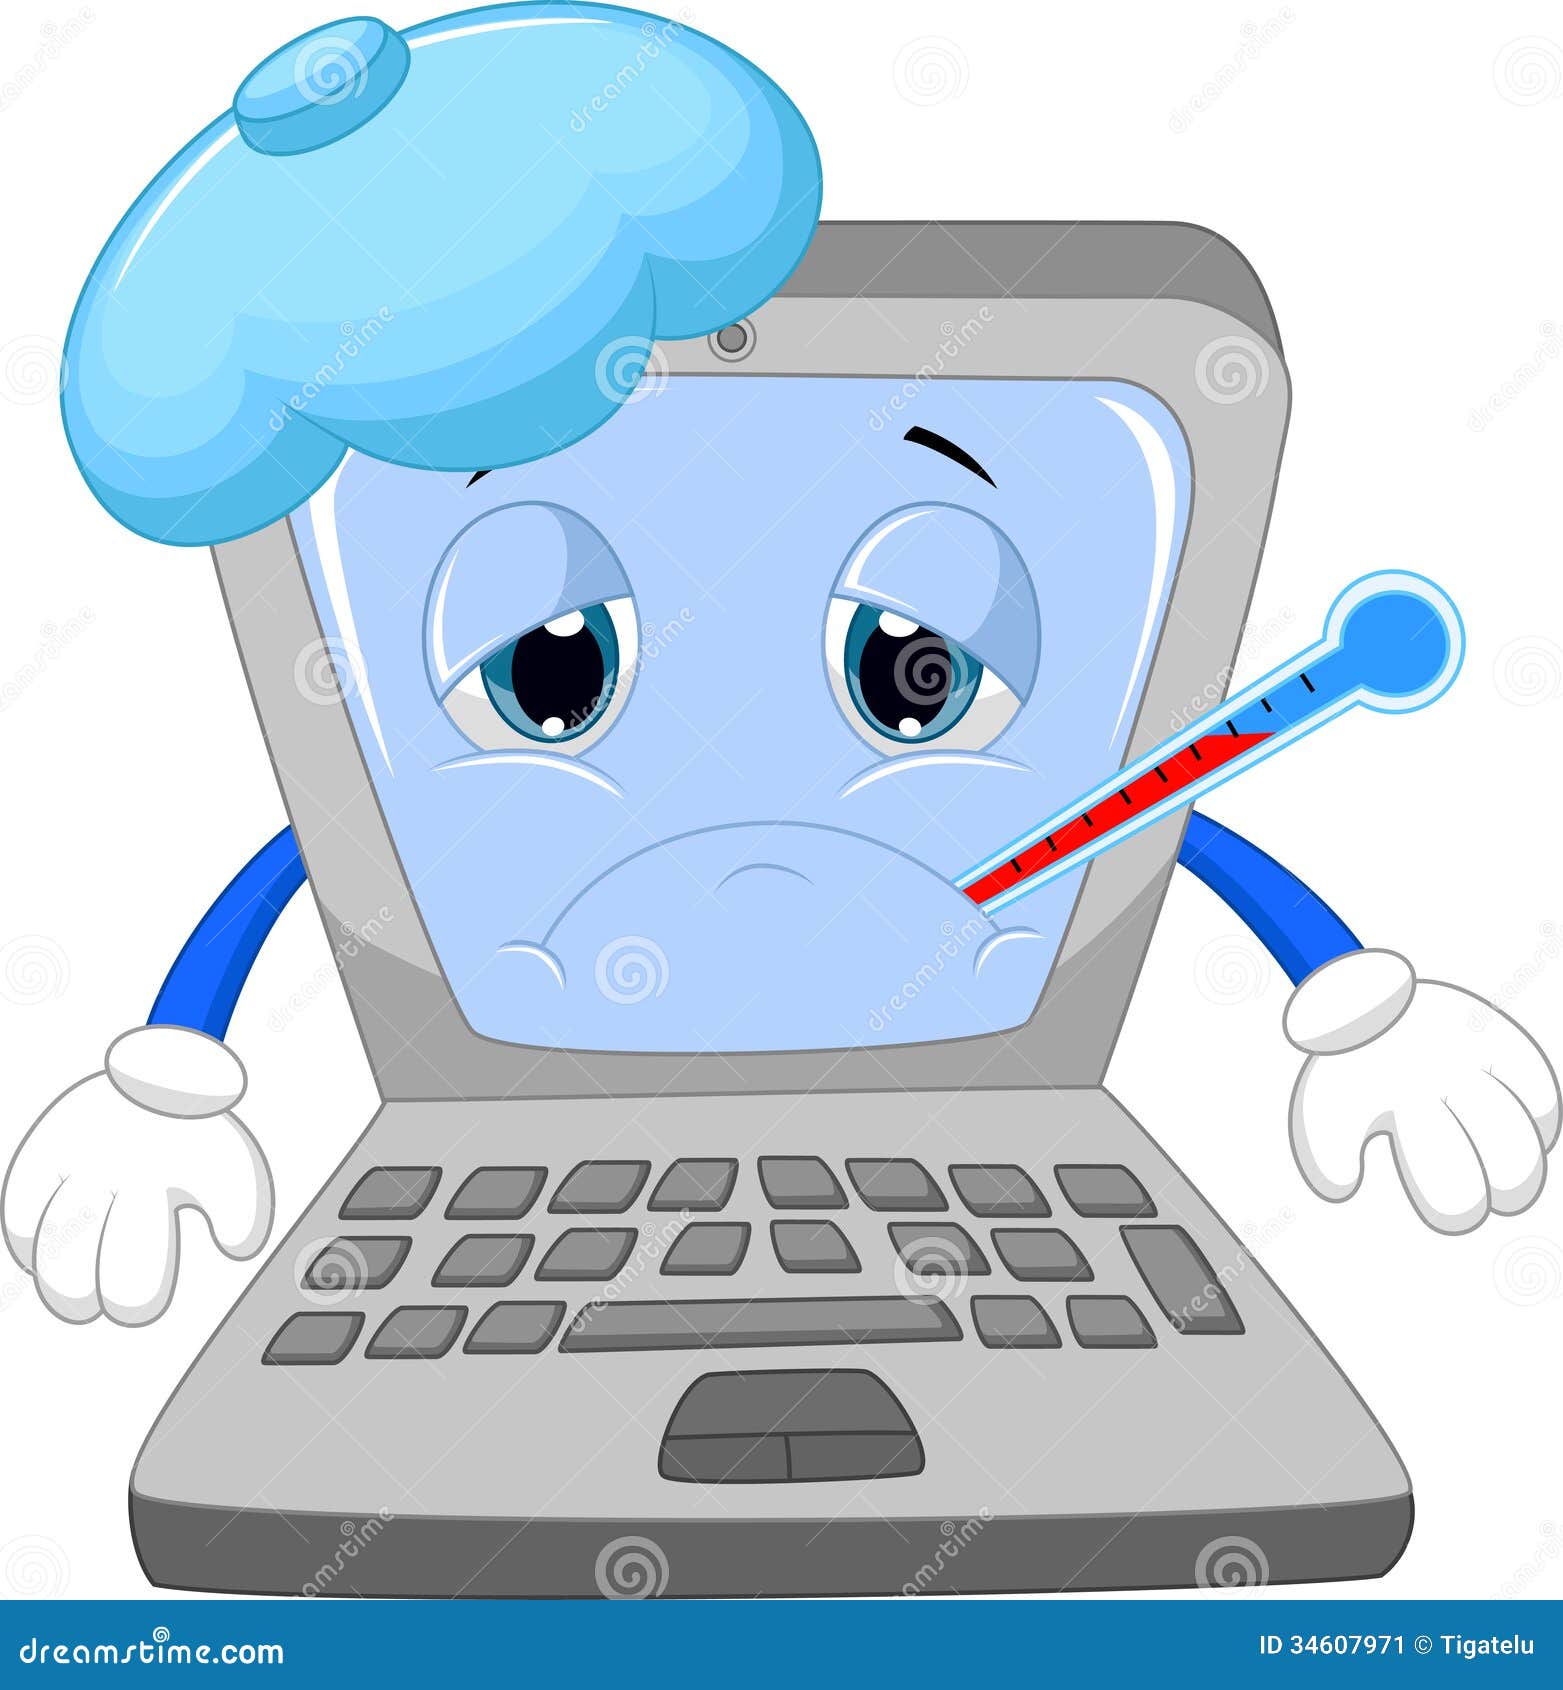 computer animated clipart - photo #29